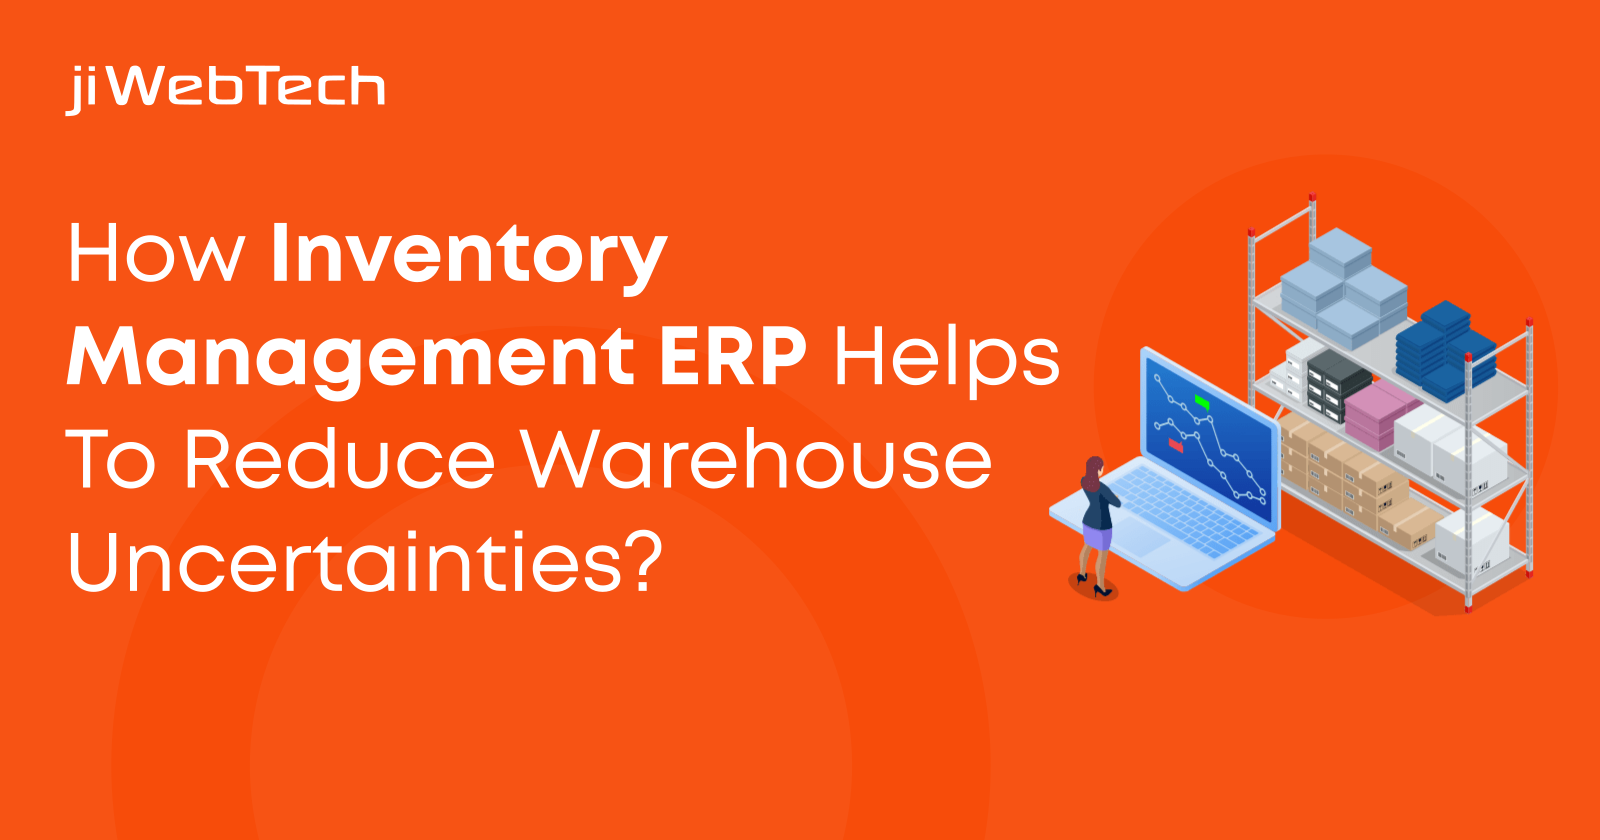 How Inventory Management ERP Helps To Reduce Warehouse Uncertainties?